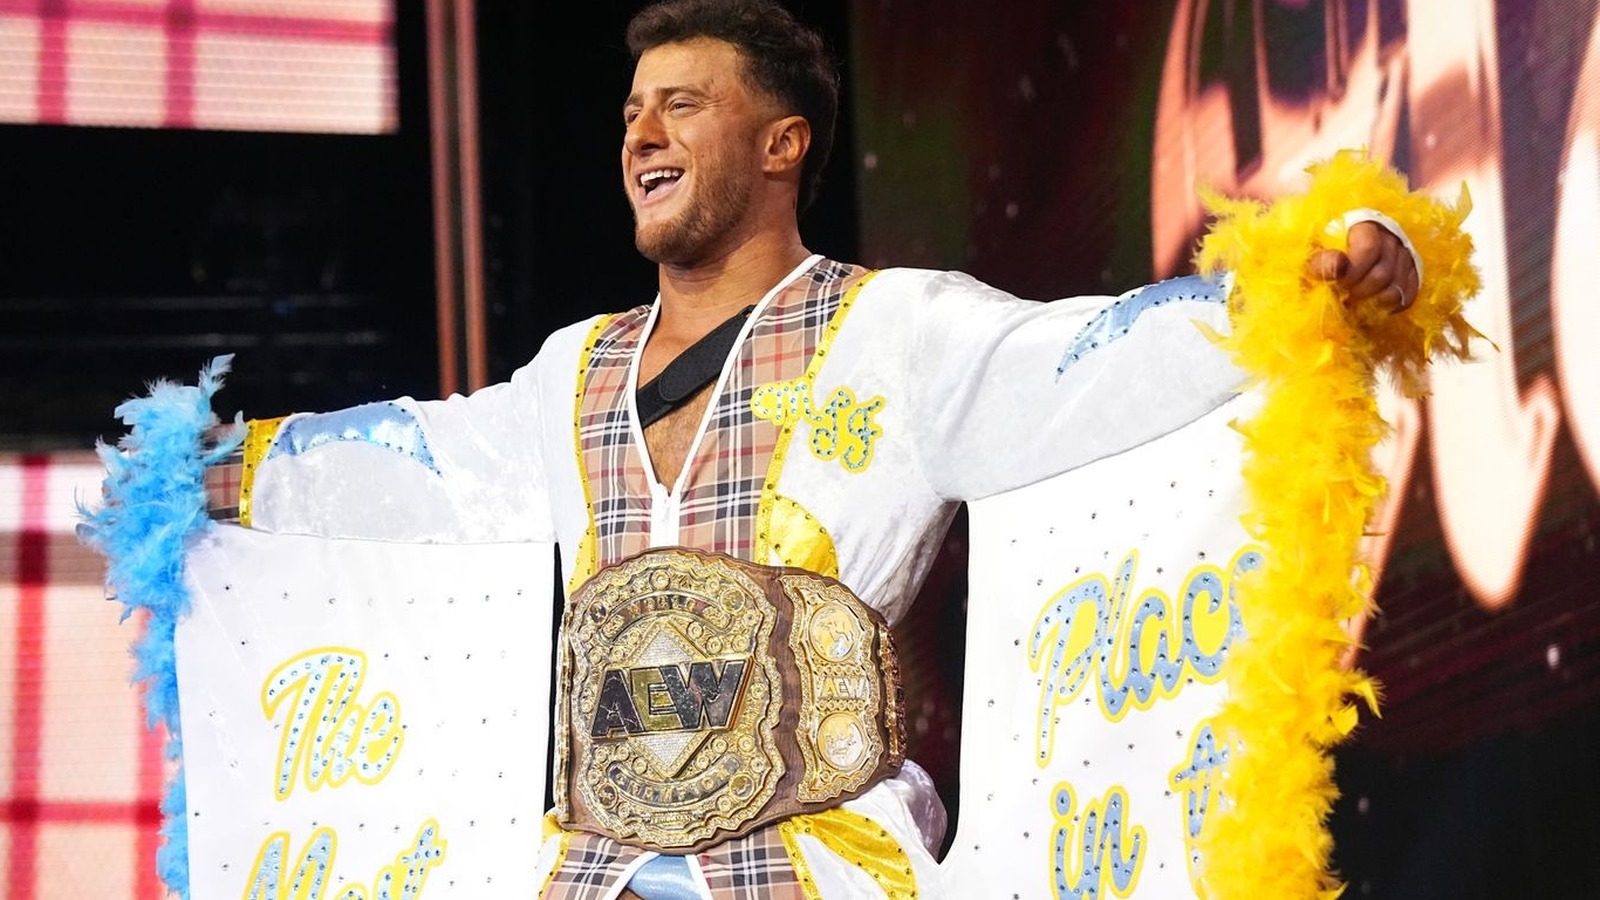 MJF Merchandise No Longer Available (Mostly) On Shop AEW